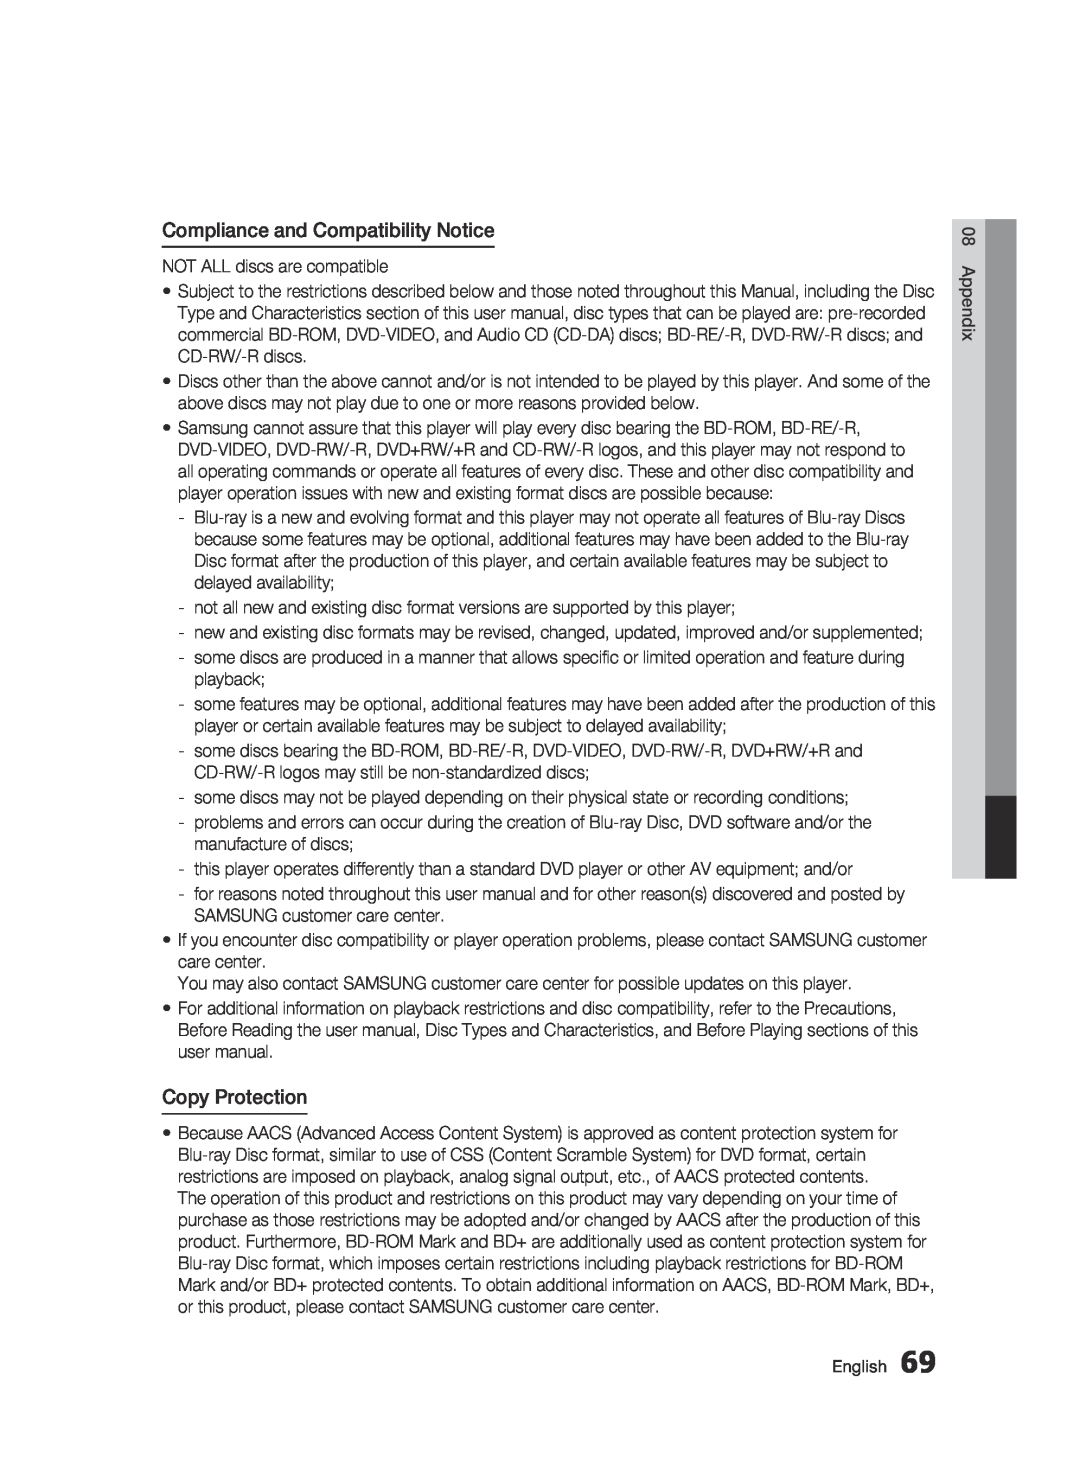 Samsung BD-D6500 user manual Compliance and Compatibility Notice, Copy Protection 